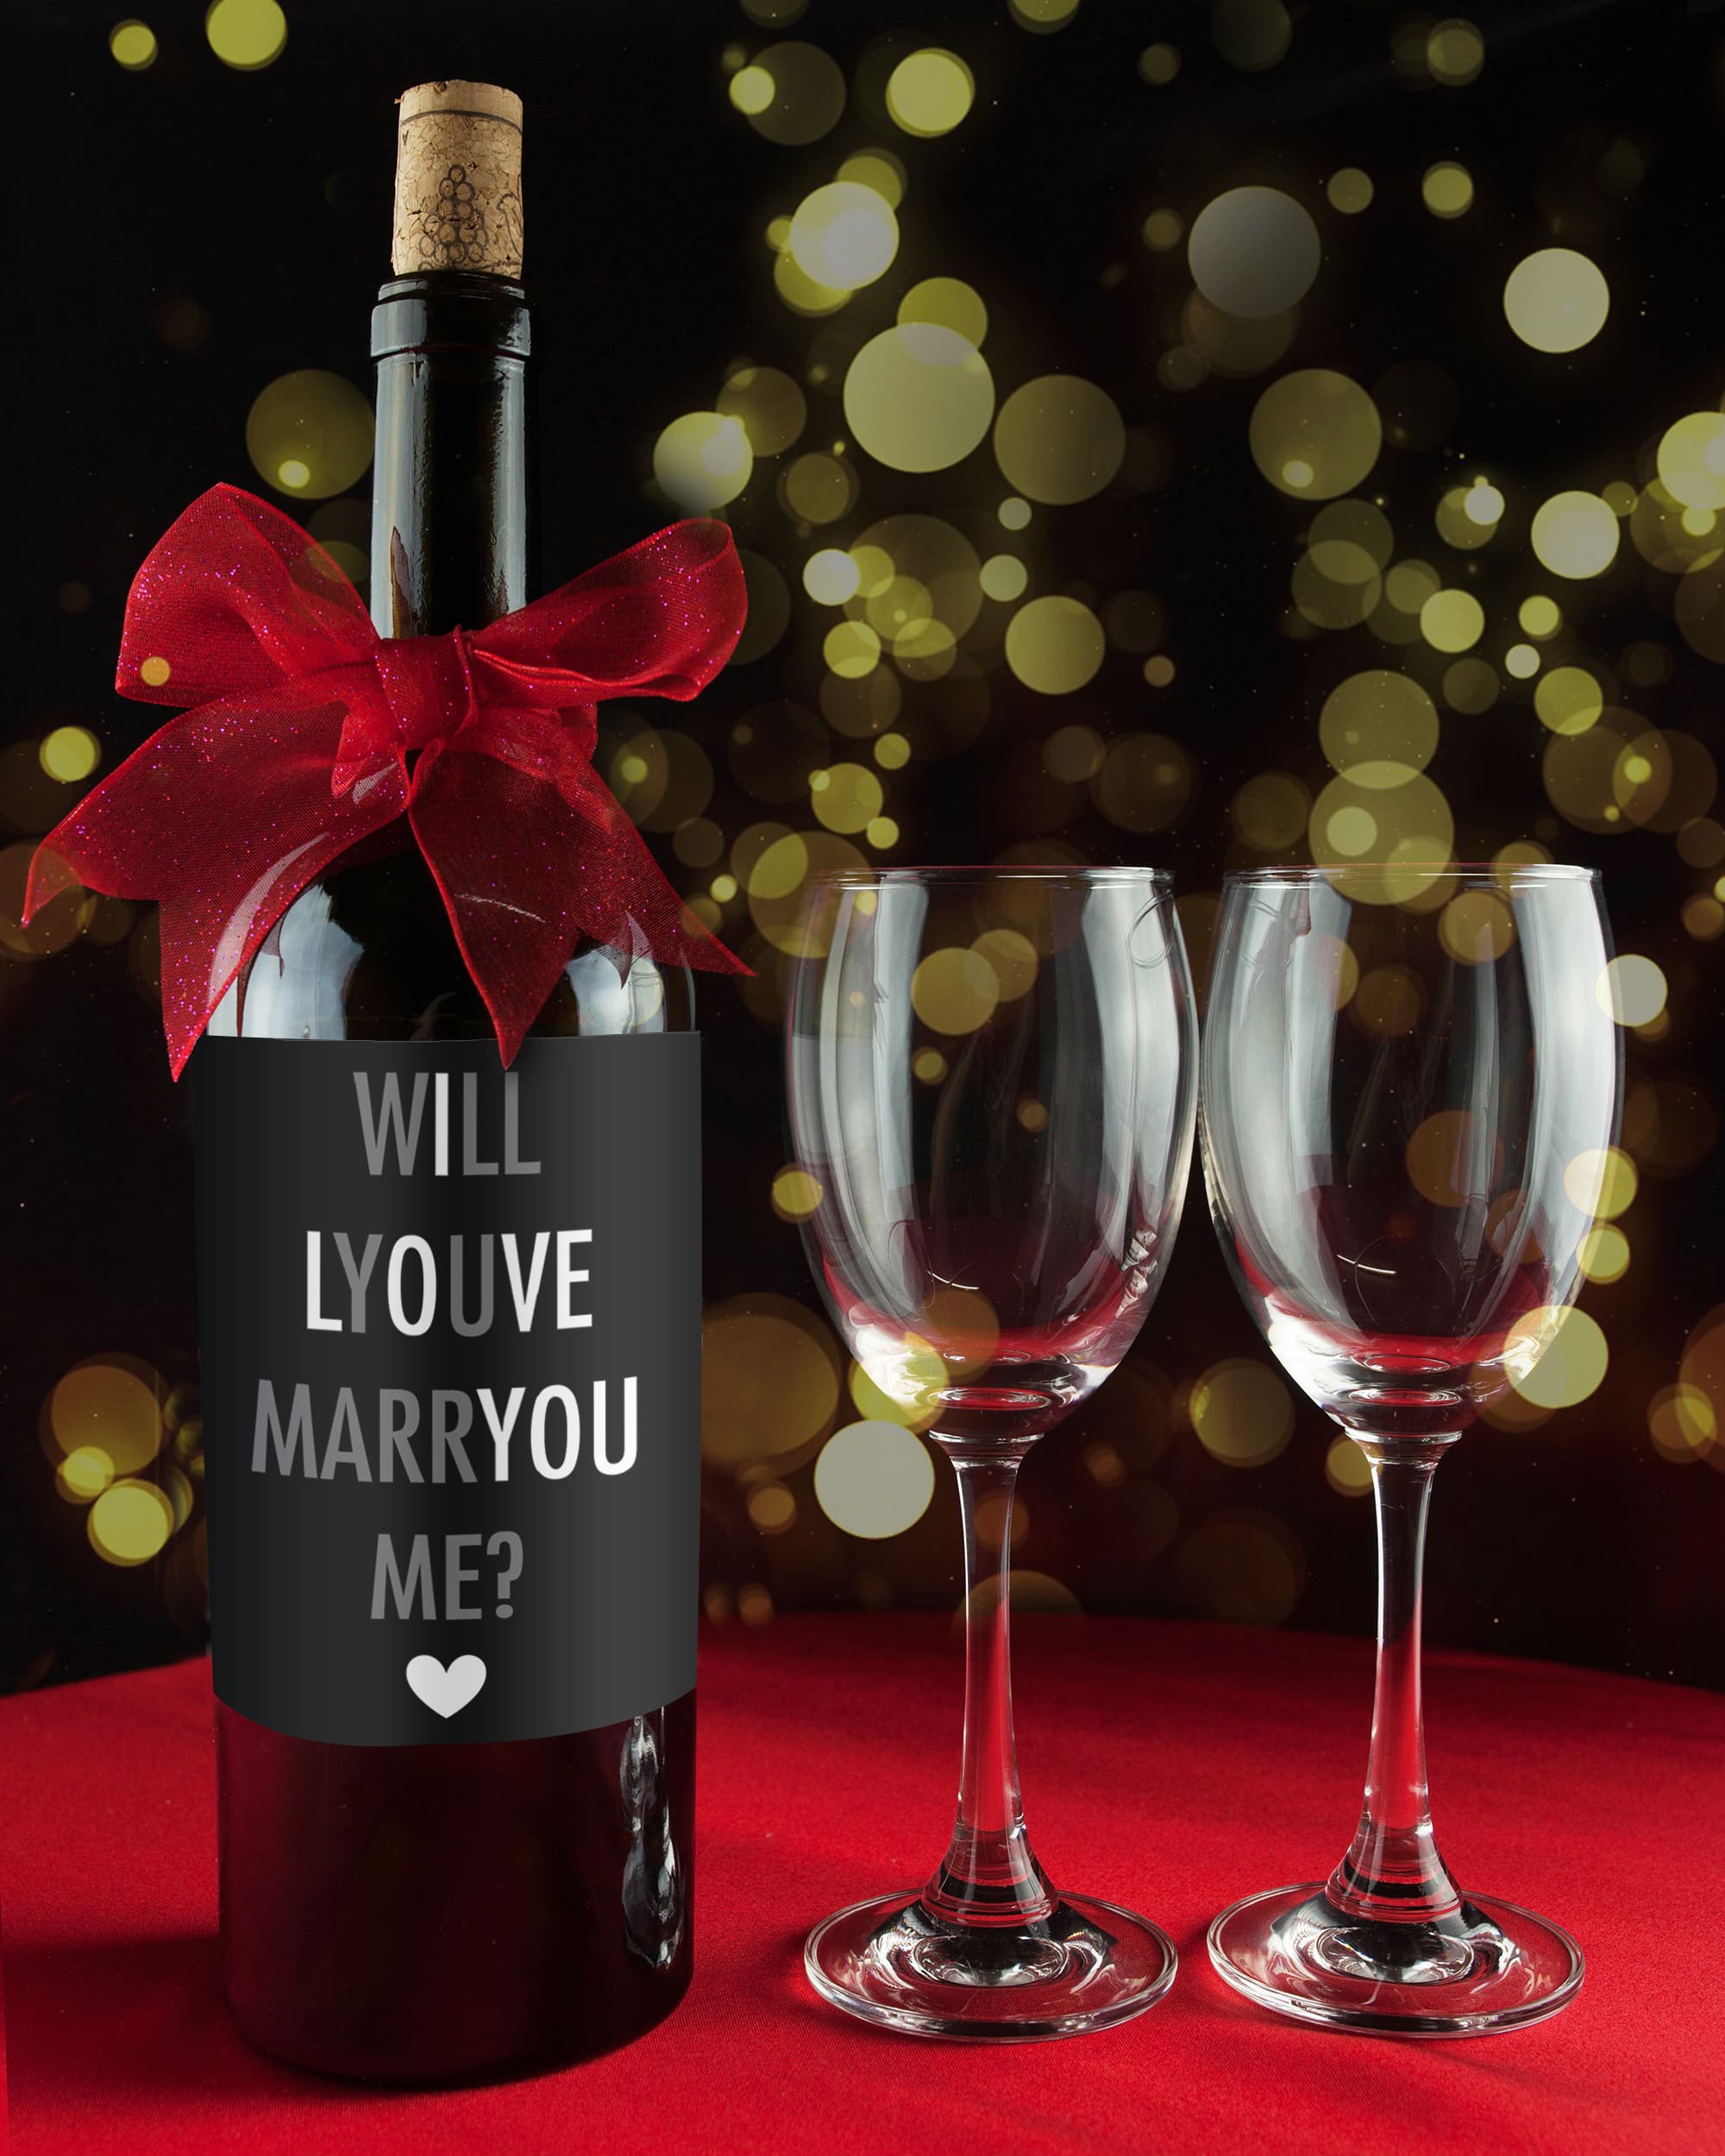 will you marry me bottle Personalised Champagne wine label Proposal idea